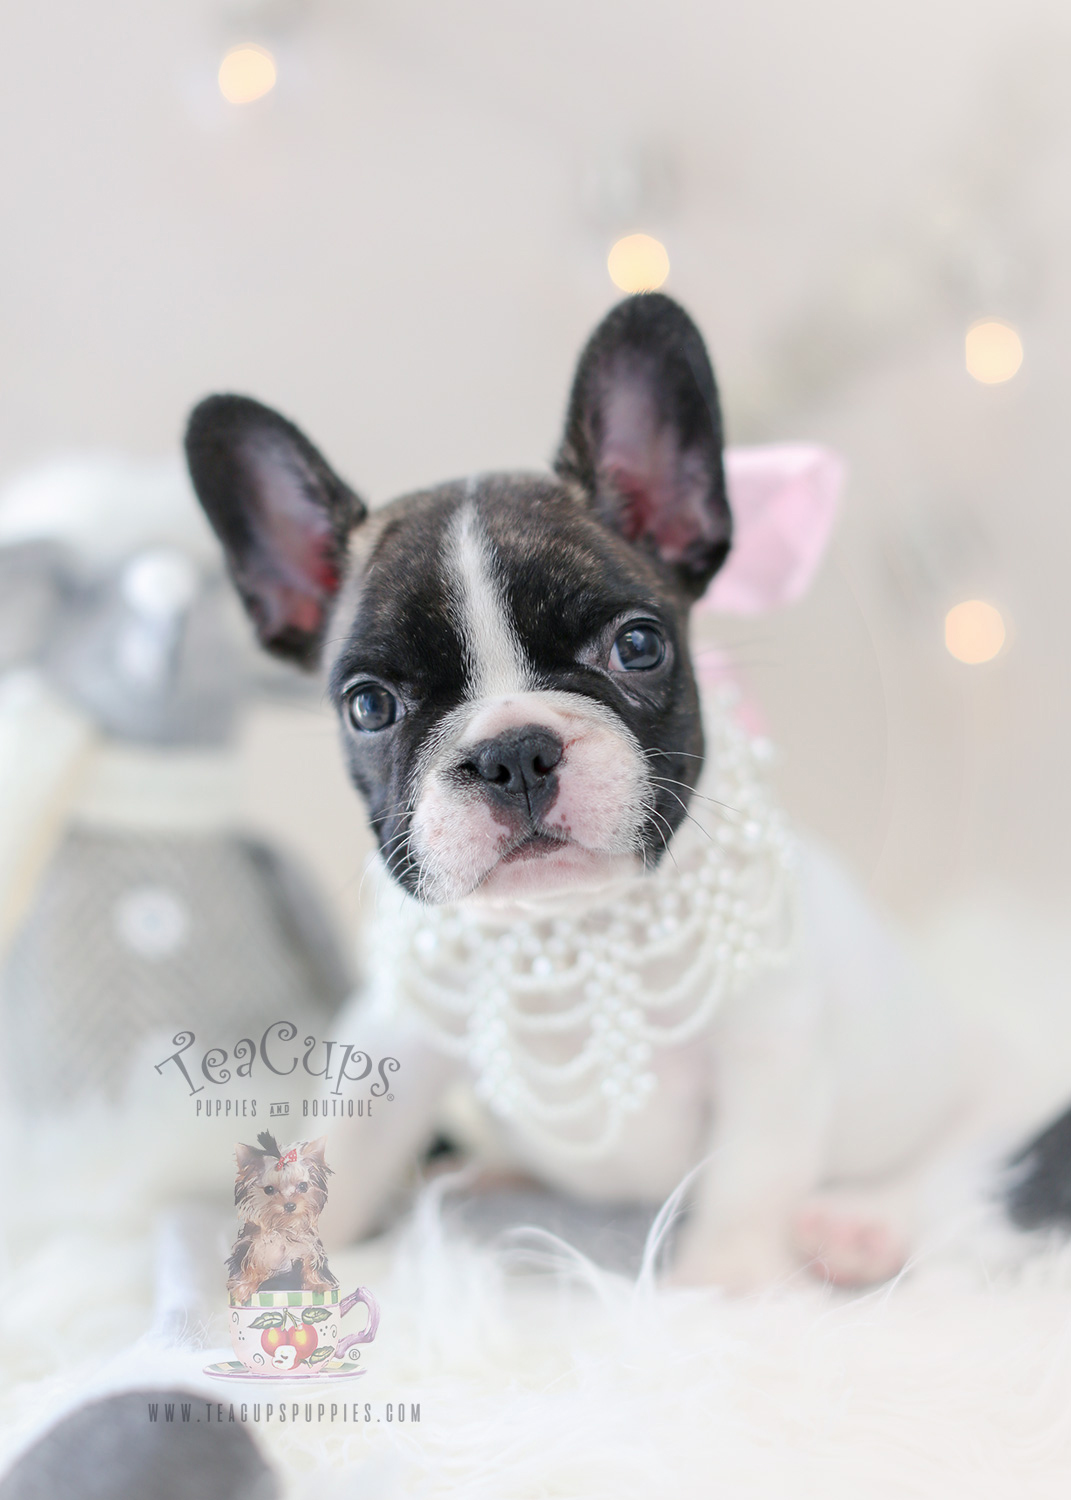 Puppy For Sale #302 Teacup Puppies French Bulldog